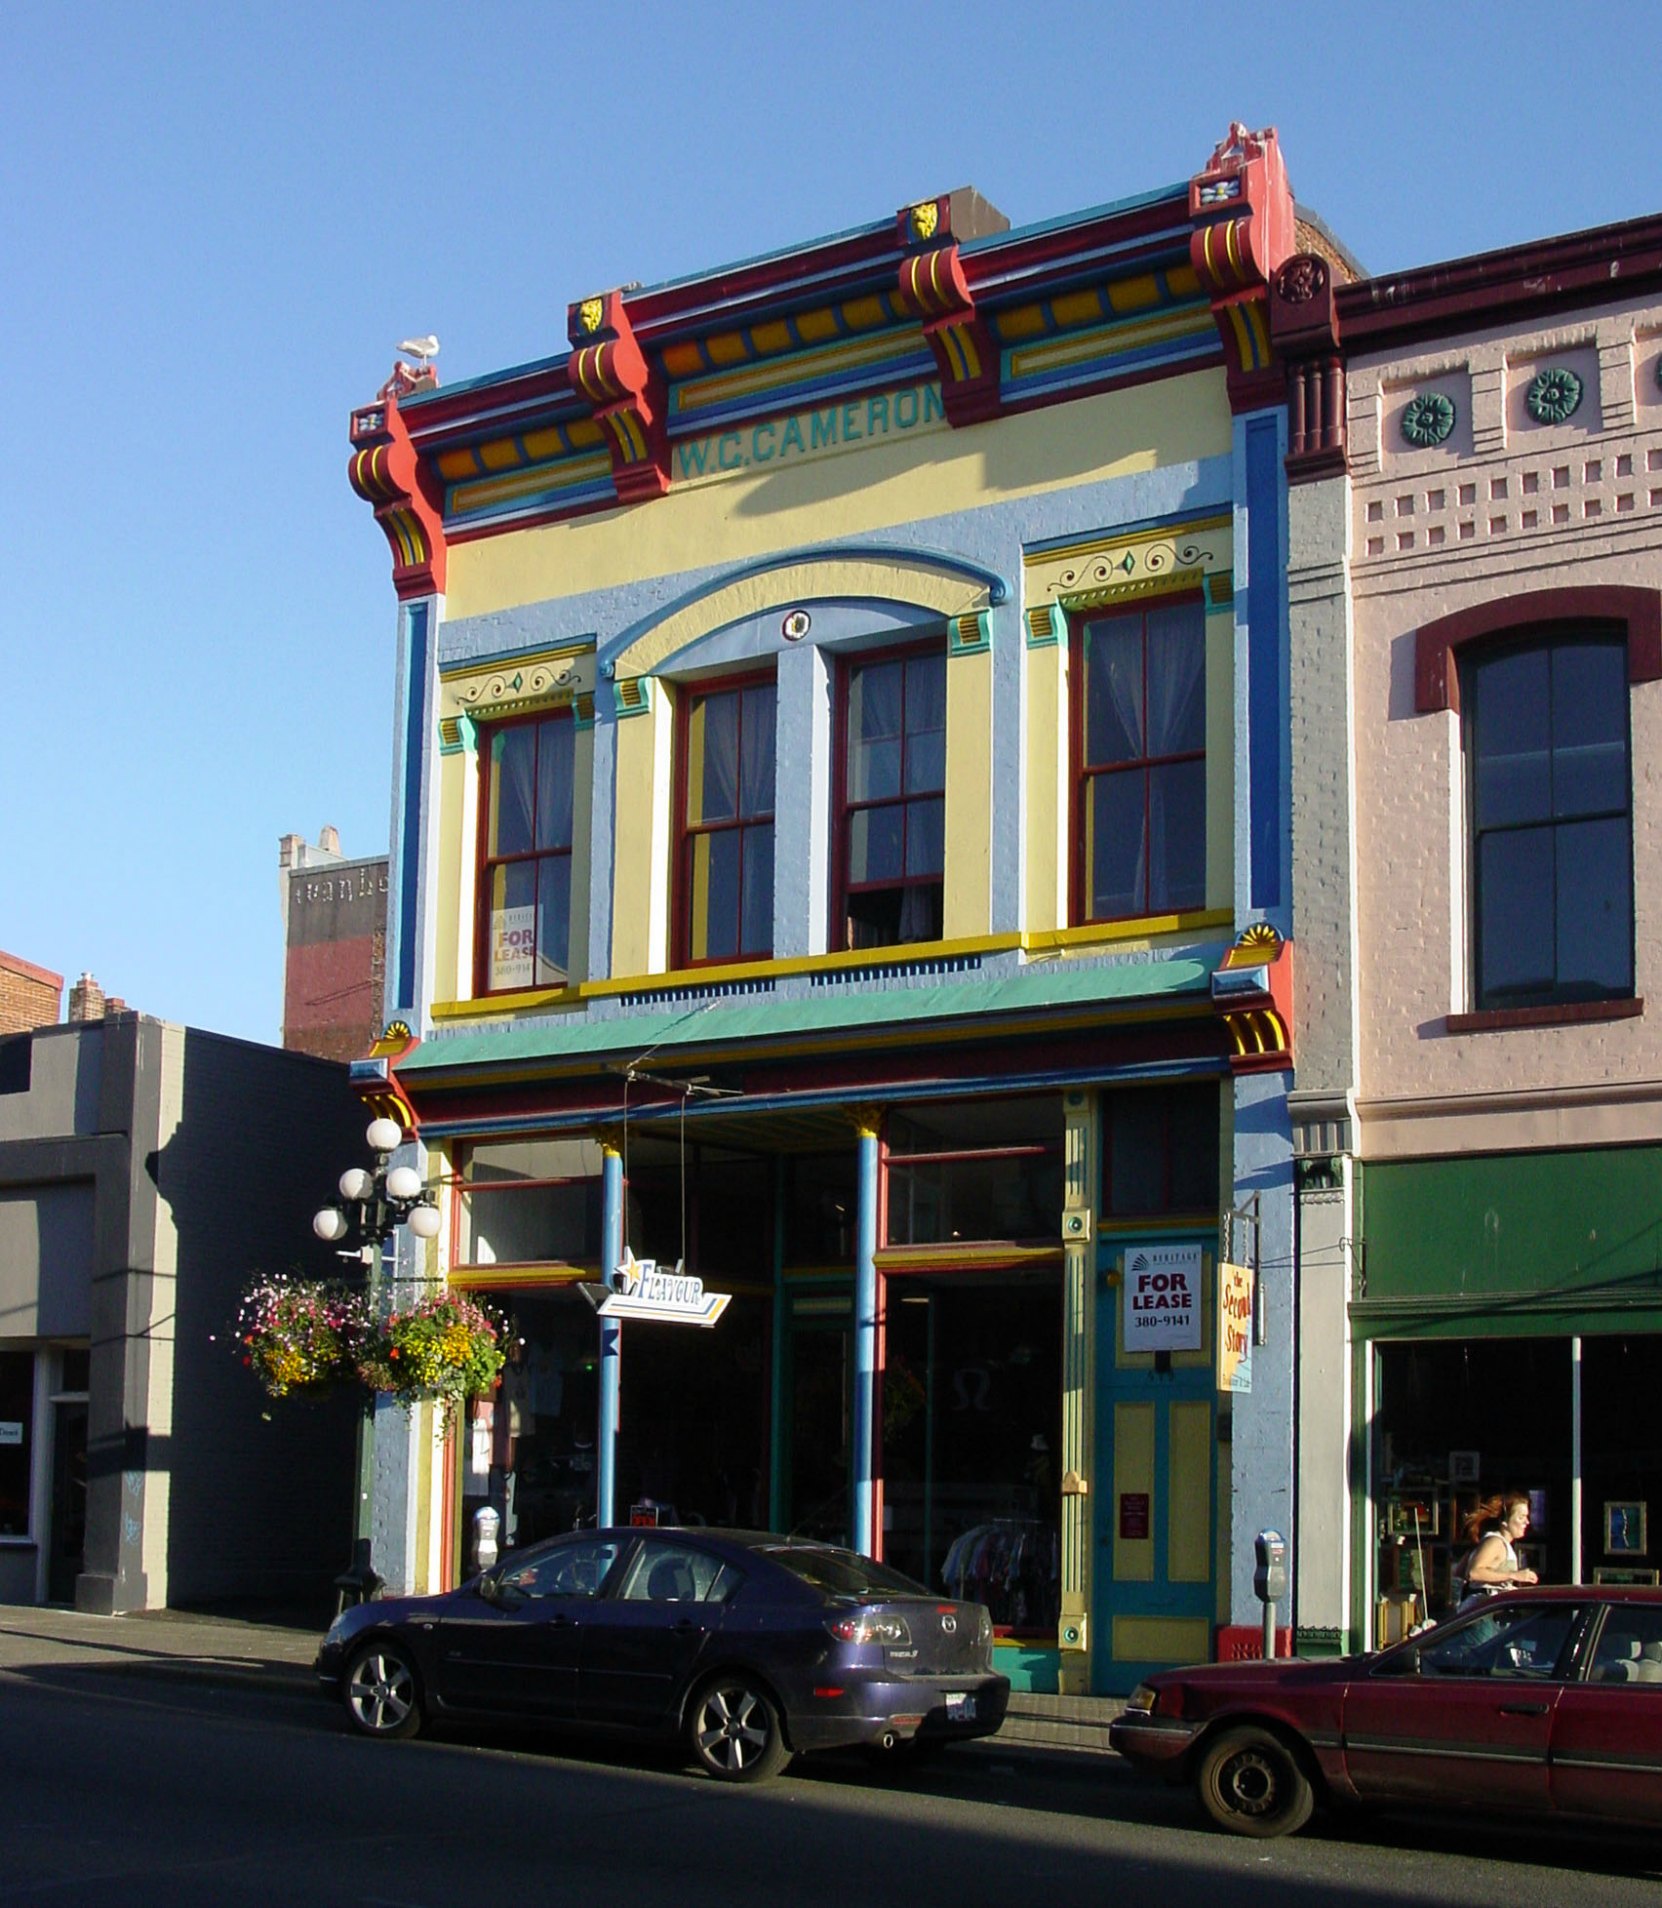 579-581 Johnson Street, built in 1888 for W.G. Cameron by architects Elmer Fisher and William Ridgway Wilson (photo by Victoria Online Sightseeing Tours Inc)